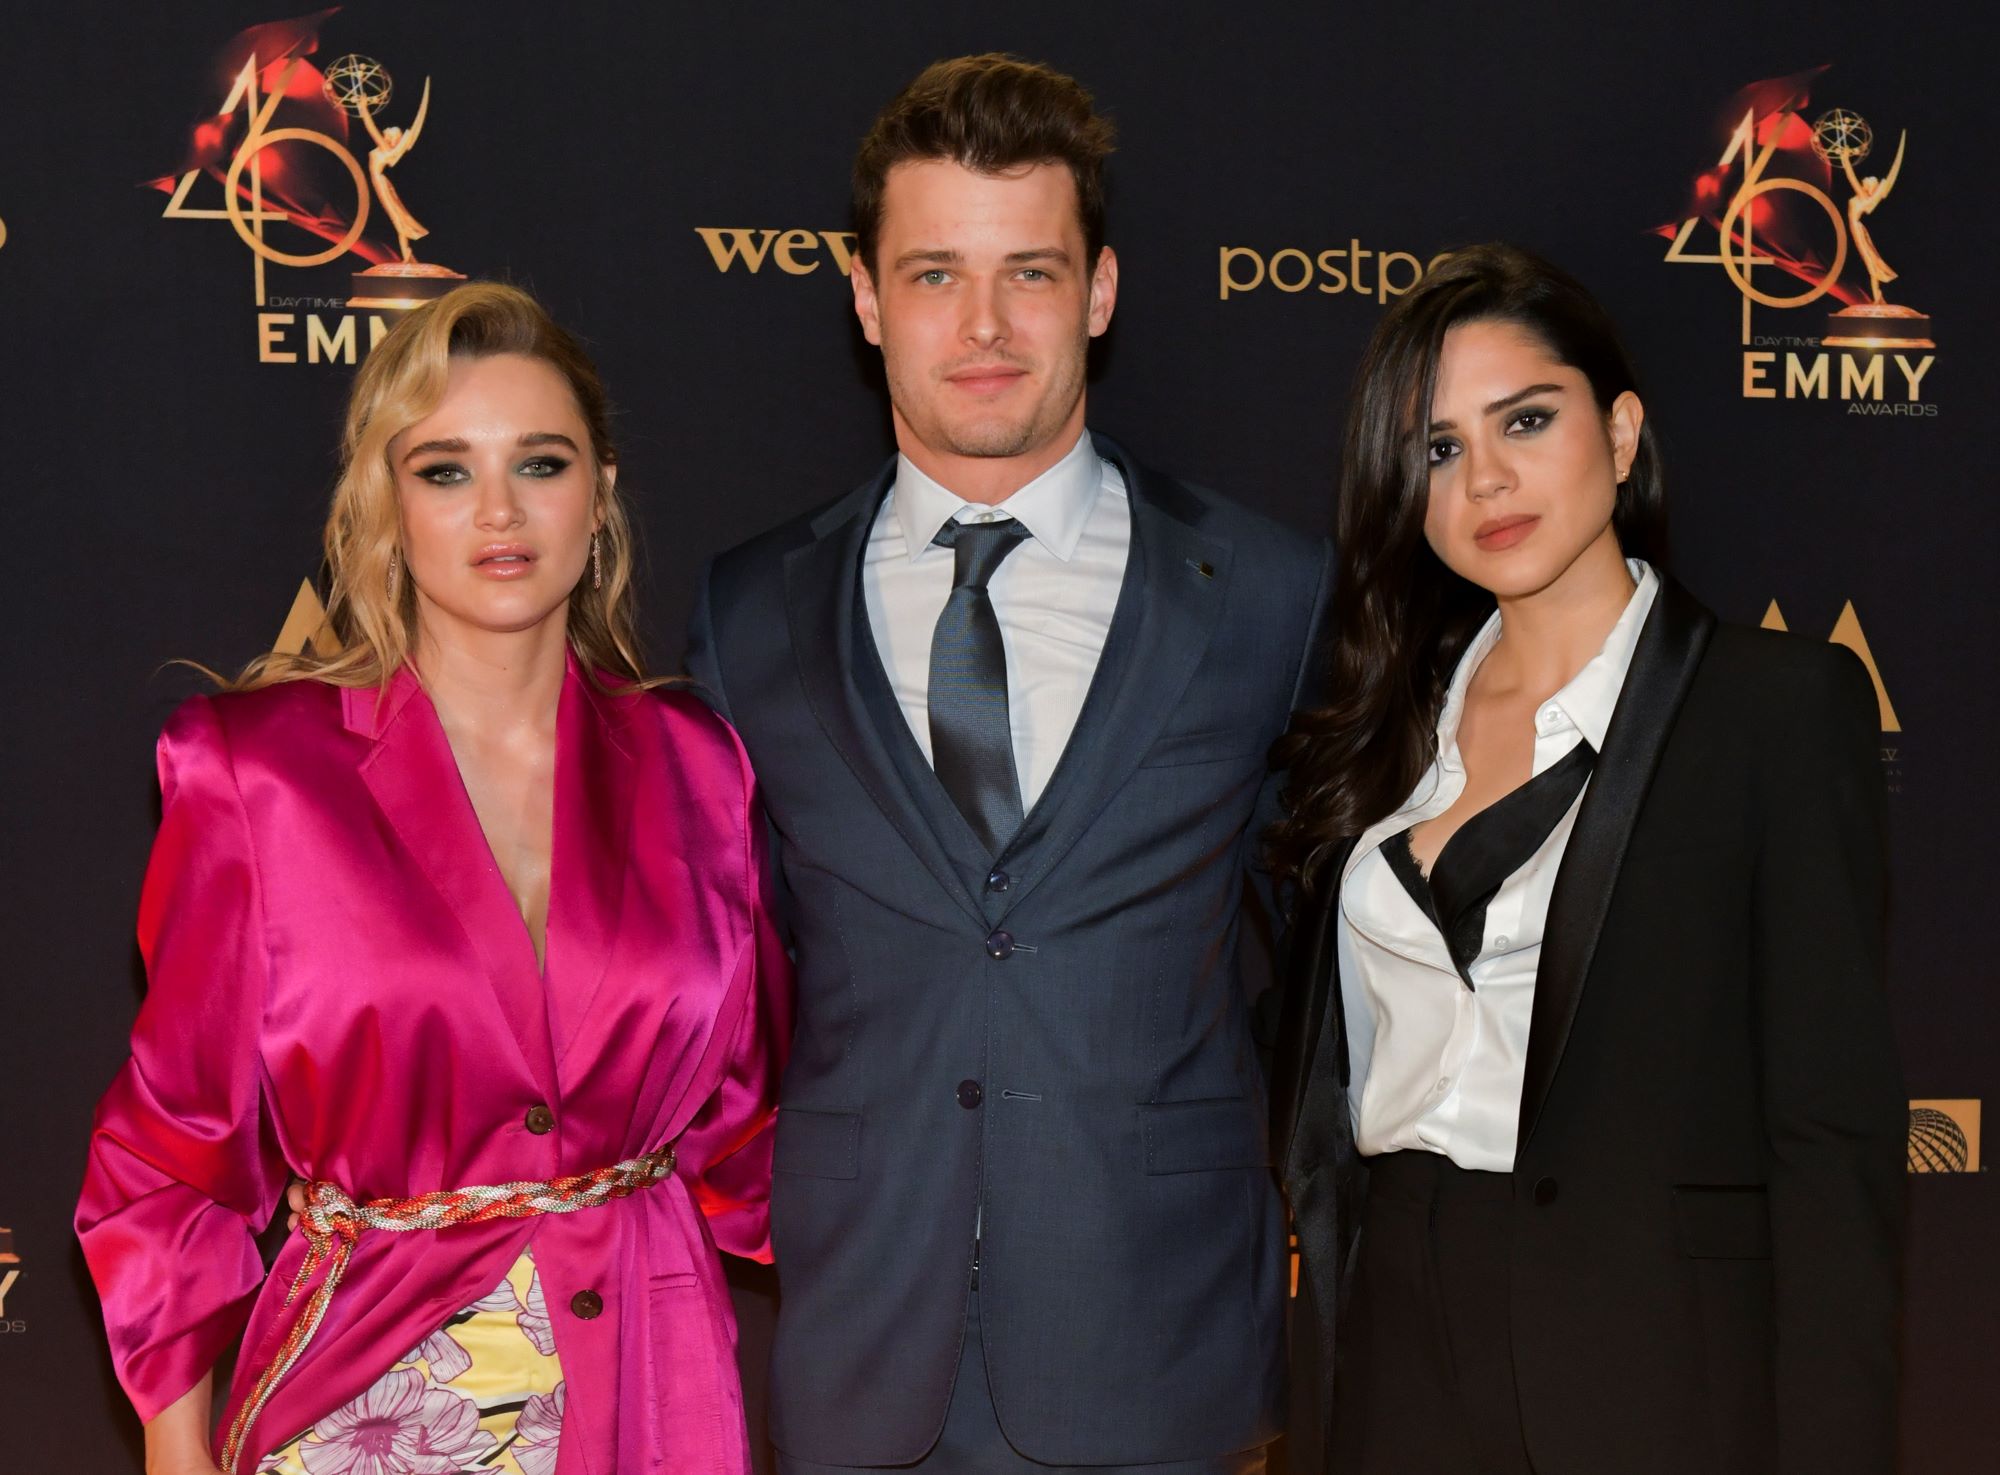 Actors Hunter King, Michael Mealor, and Sasha Calle huddle together and pose for a picture on the red carpet. Hunter wears a pink suit jacket, Michael wears a dark suit and tie, and Sasha wears a black suit over a white button up shirt.